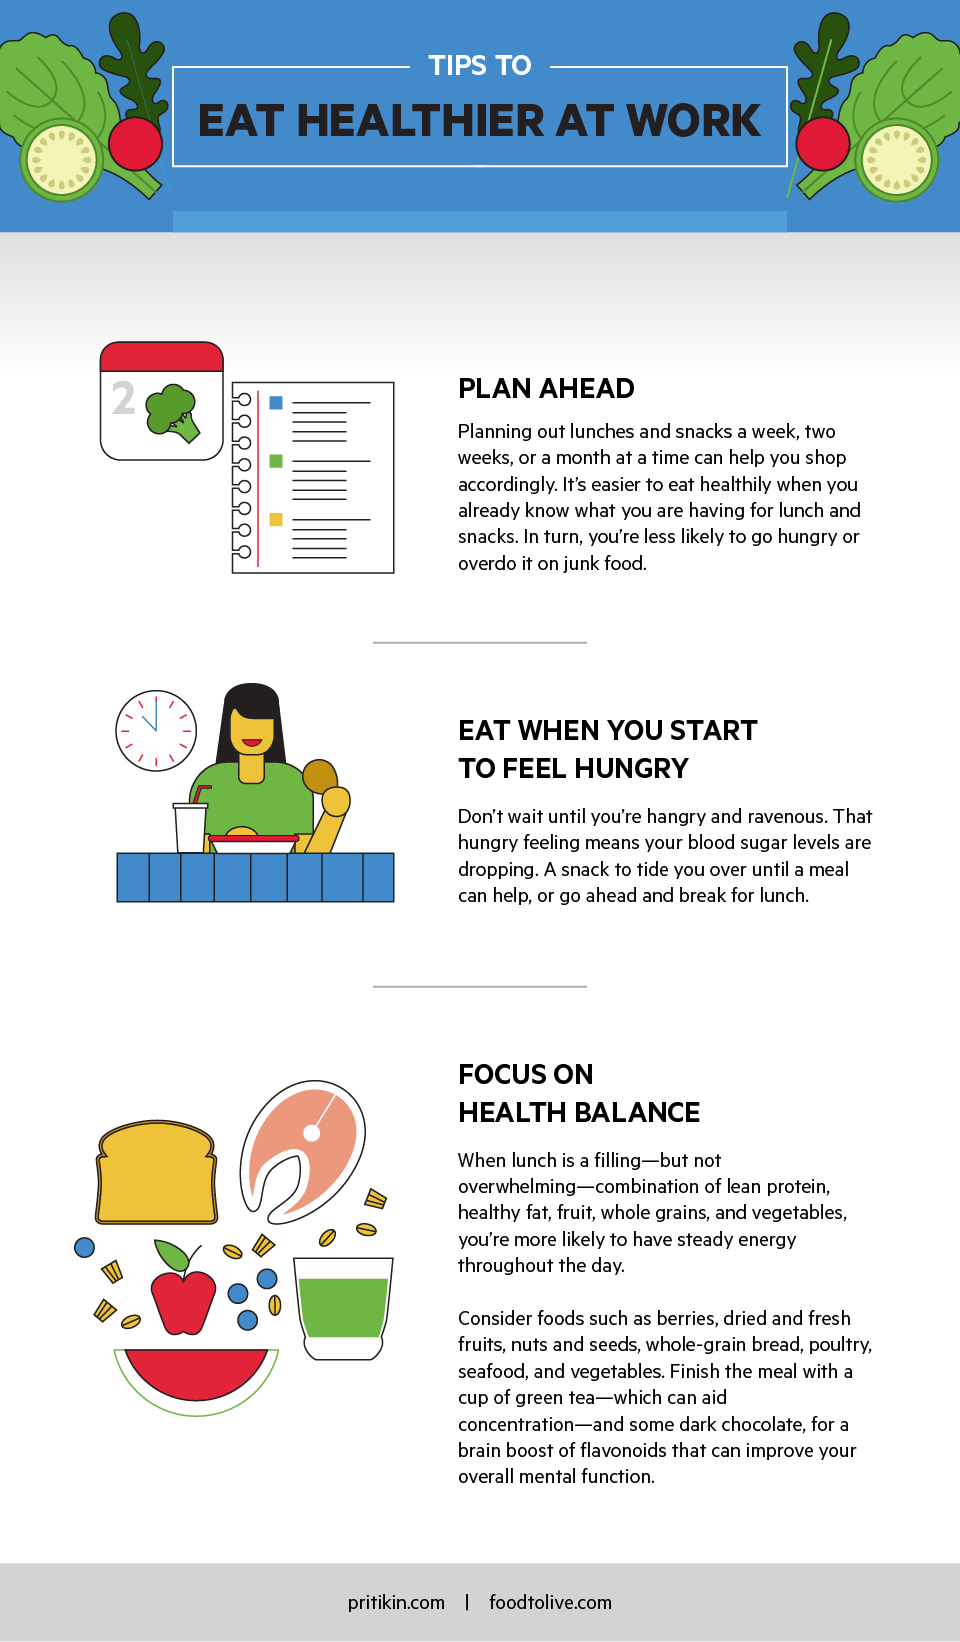 Tips to Eat Healthier at Work